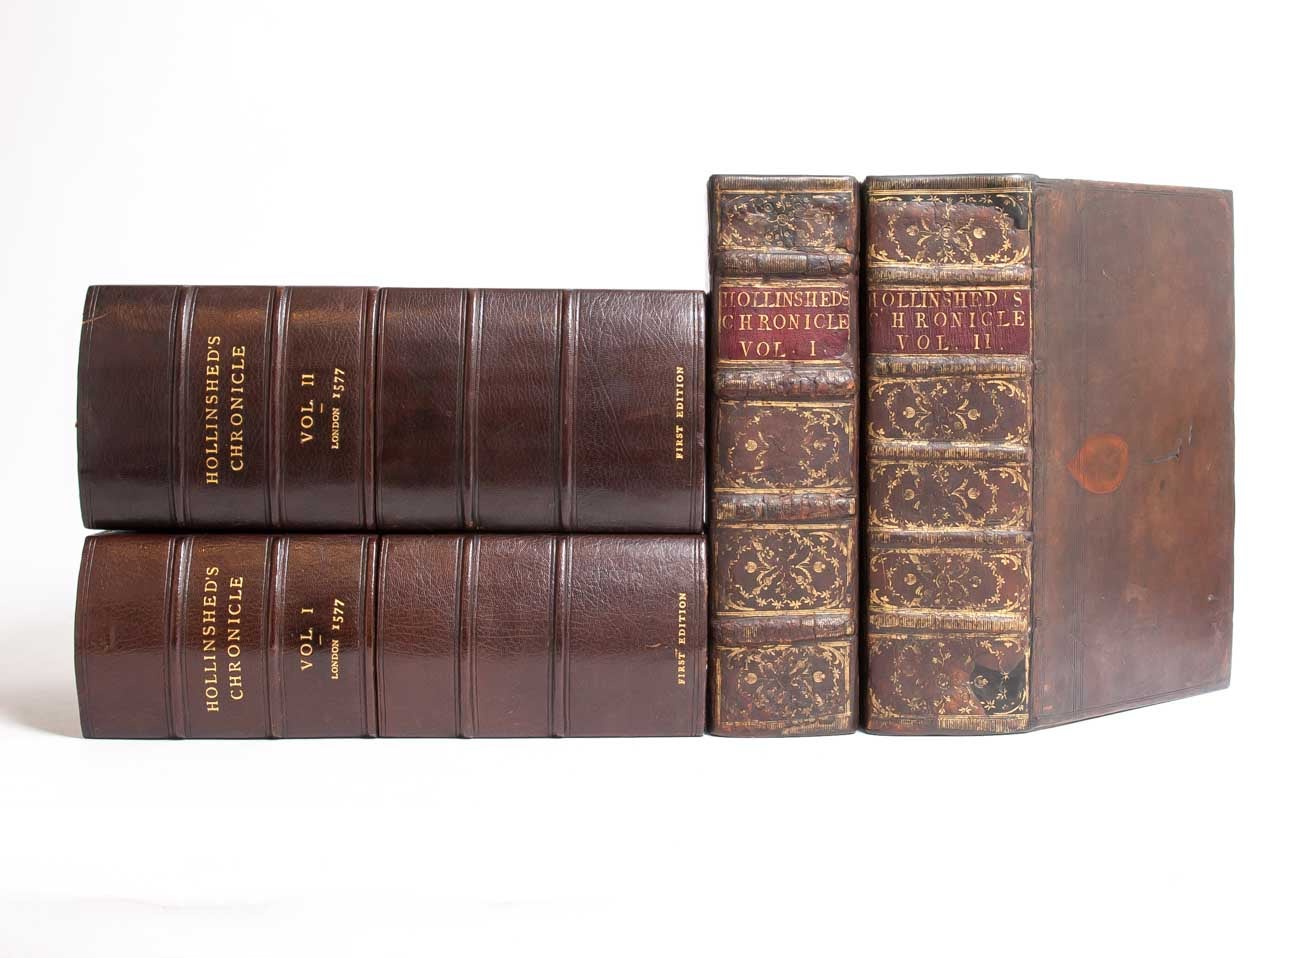 (Item #2383) The Firste [Laste] Volume of the Chronicles of England, Scotlande, and Irelande. Raphael Holinshed.